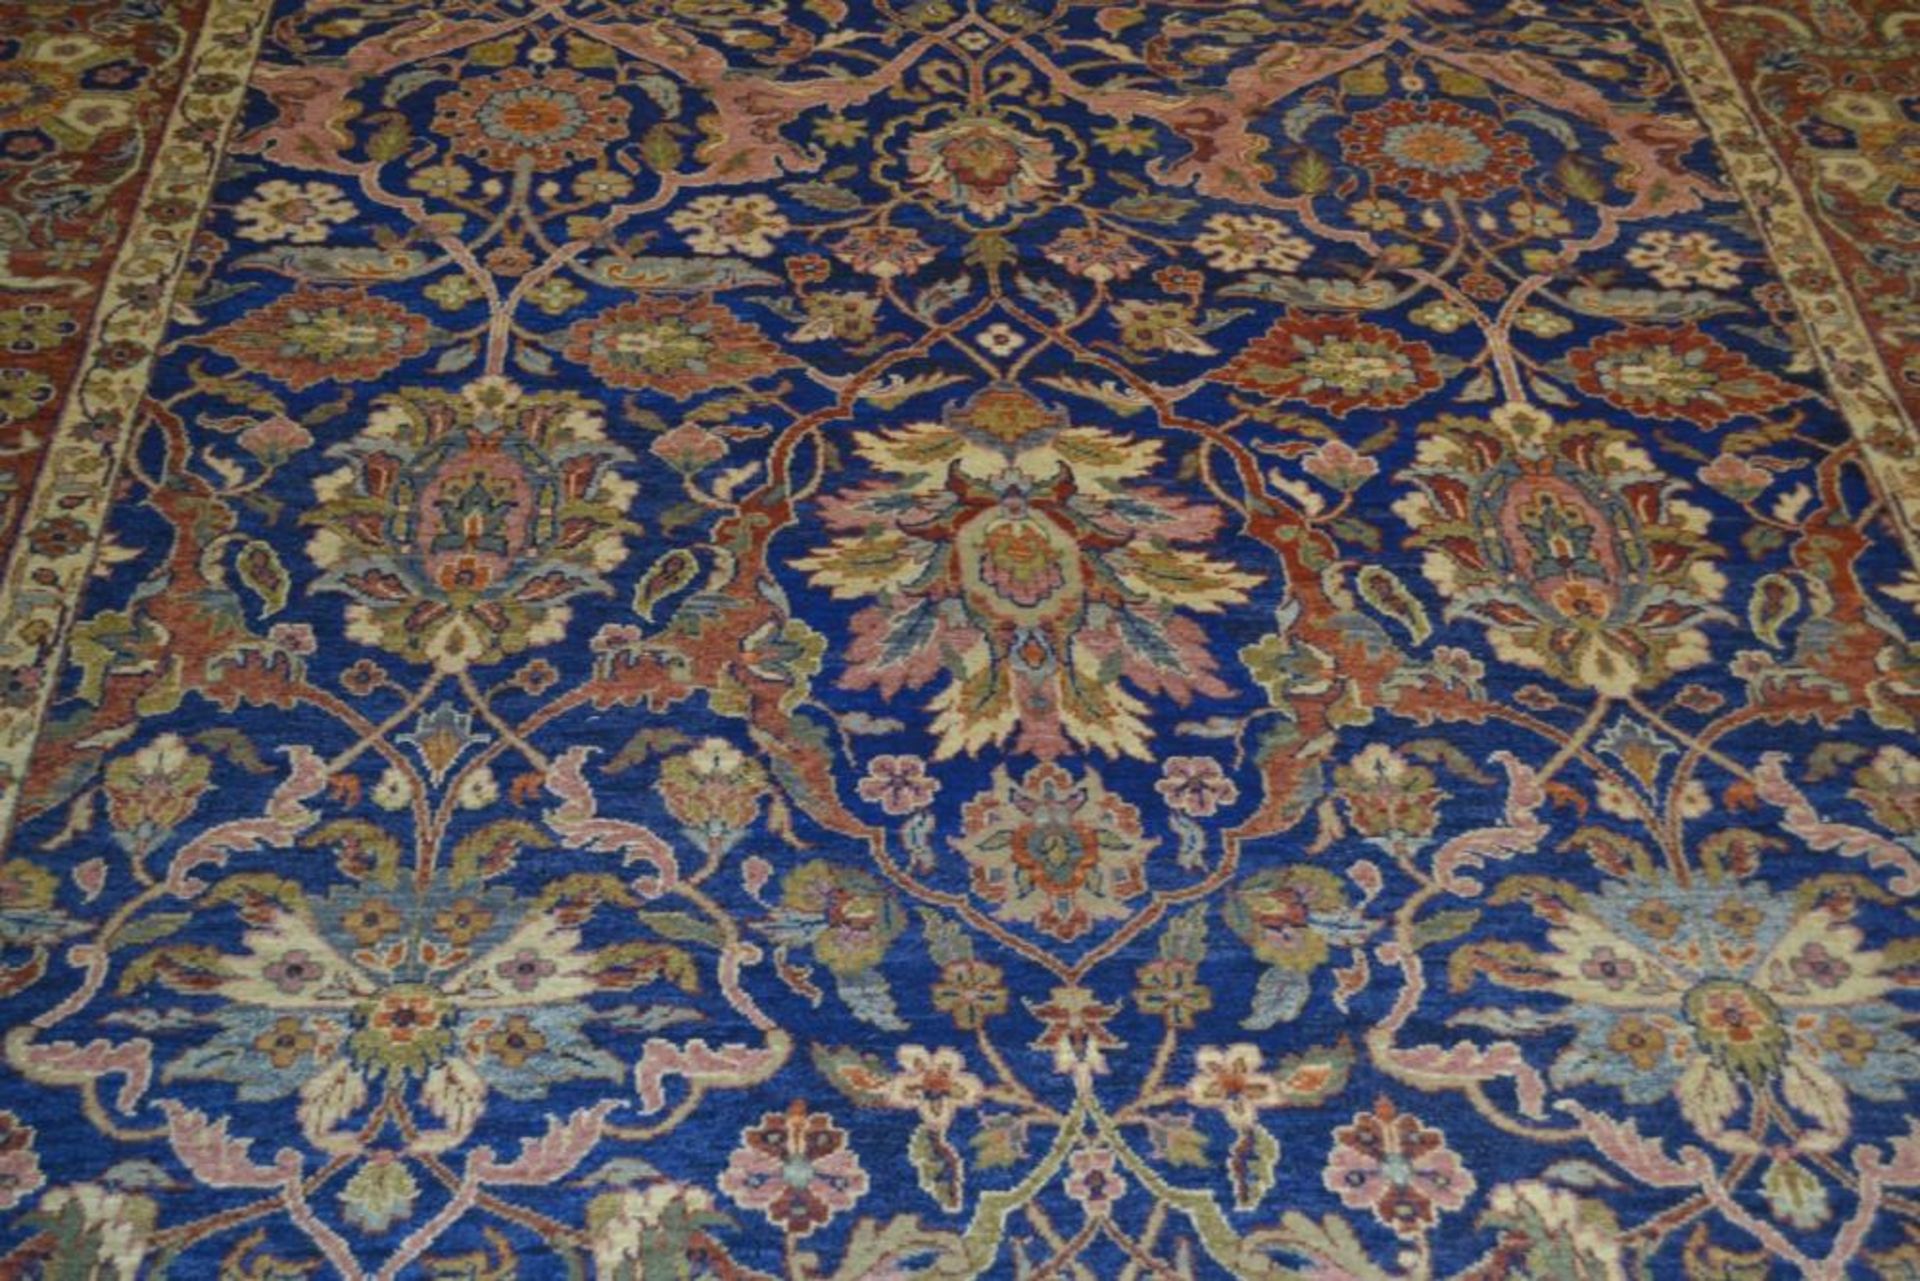 1 x Fine Indian Vegetable Dyed Handmade Carpet in Navy and Rust - All Wool With Cotton Foundation - - Image 6 of 22